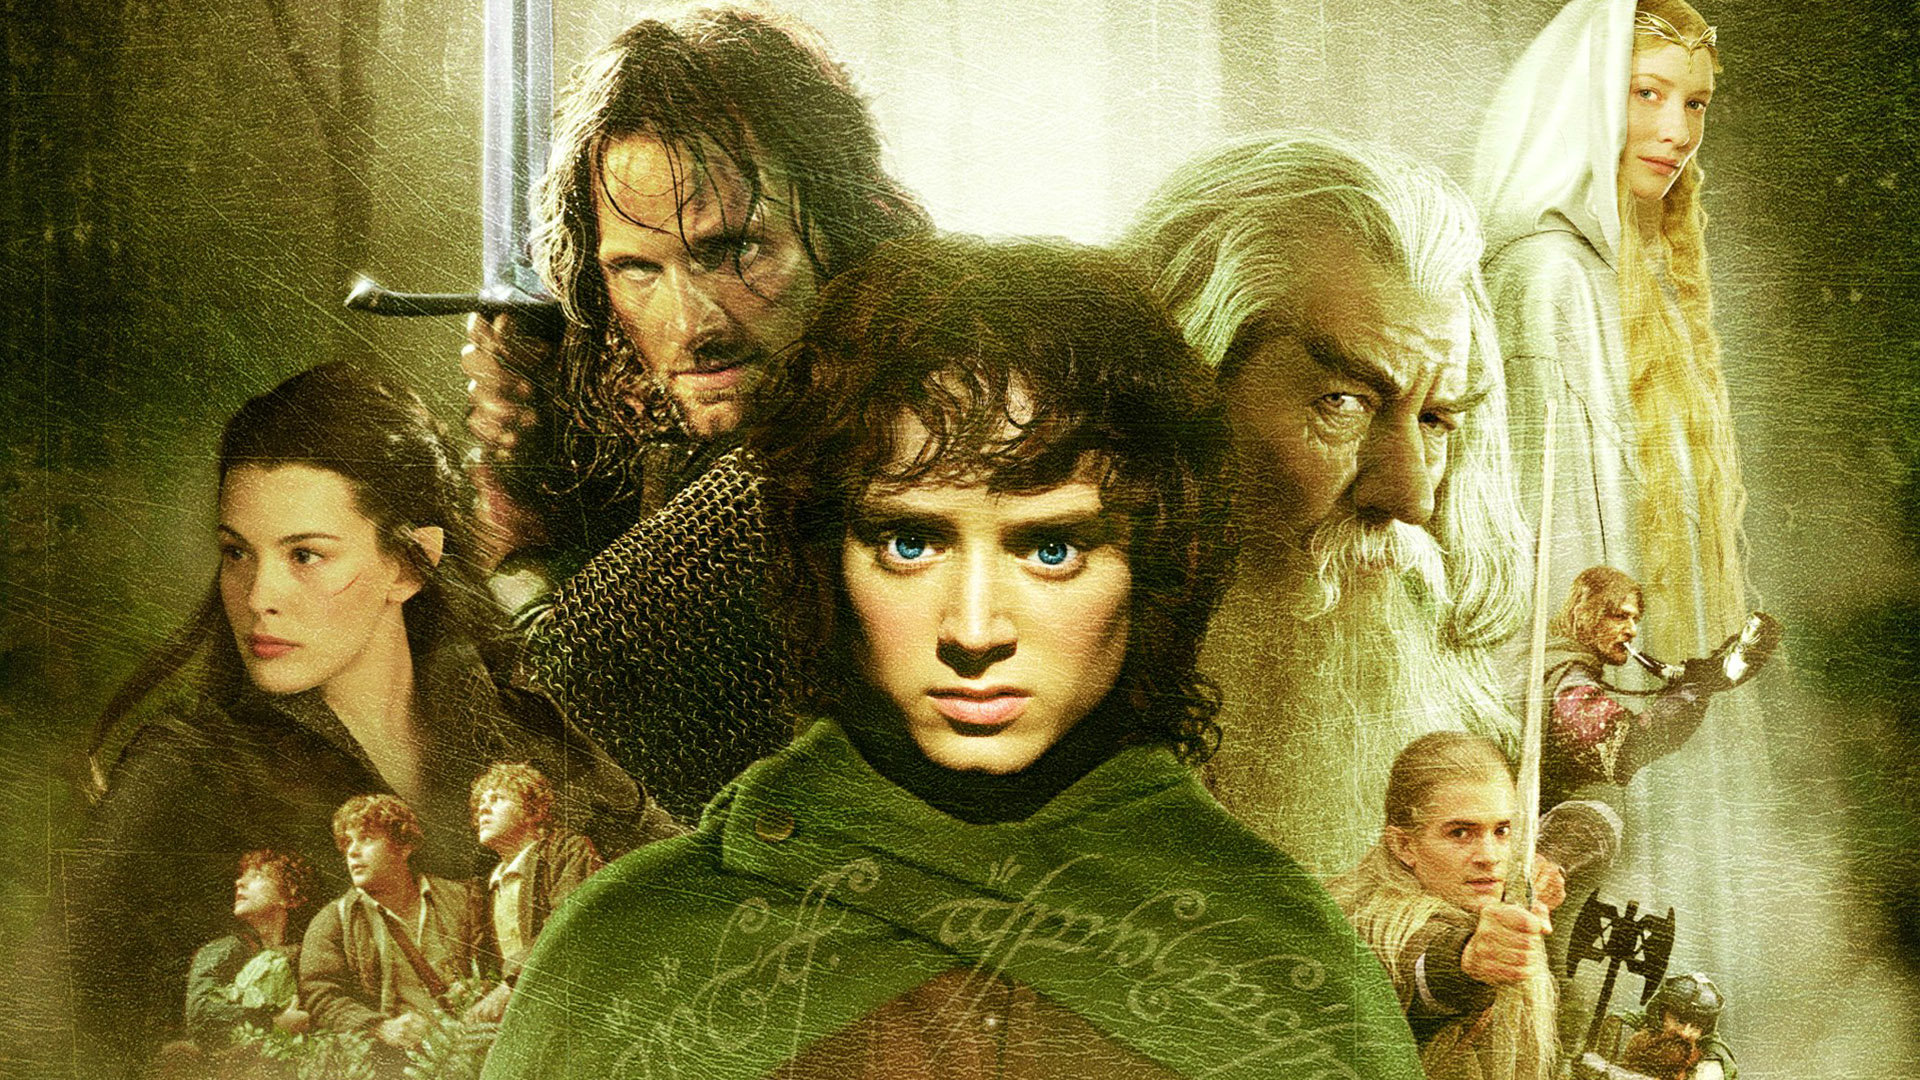 Awesome The Lord Of The Rings: The Fellowship Of The Ring free wallpaper ID:194665 for hd 1080p computer